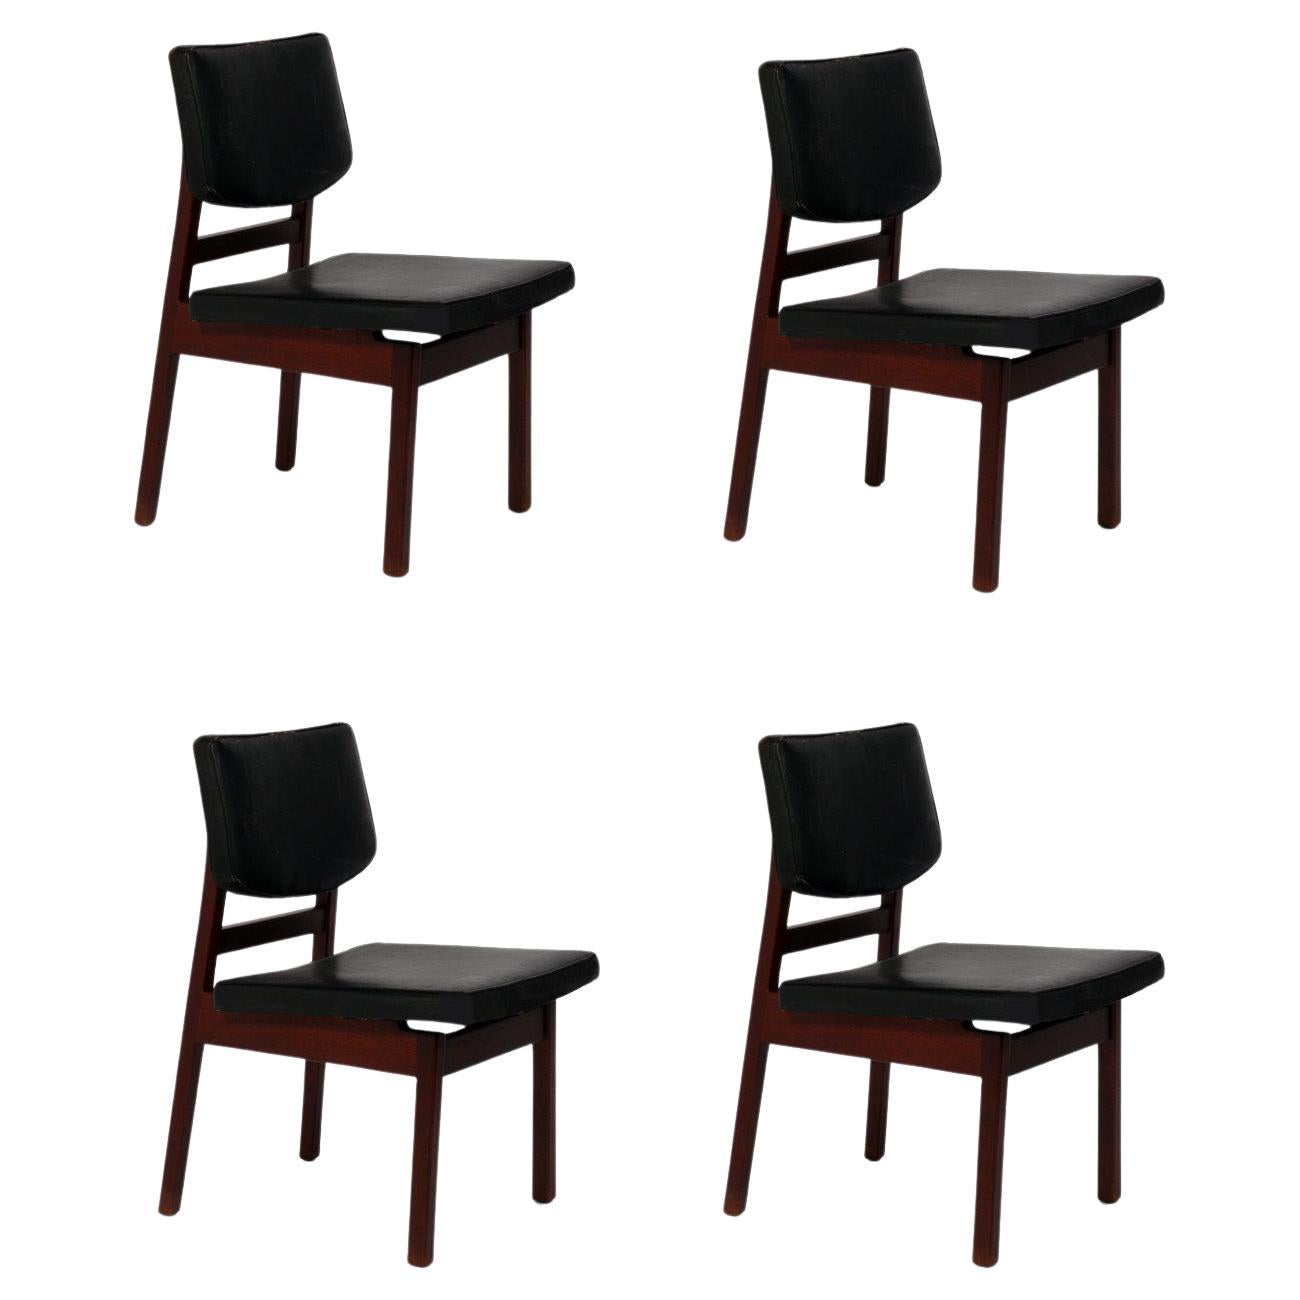 Jens Risom Dining Chairs Refinished and Reupholstered